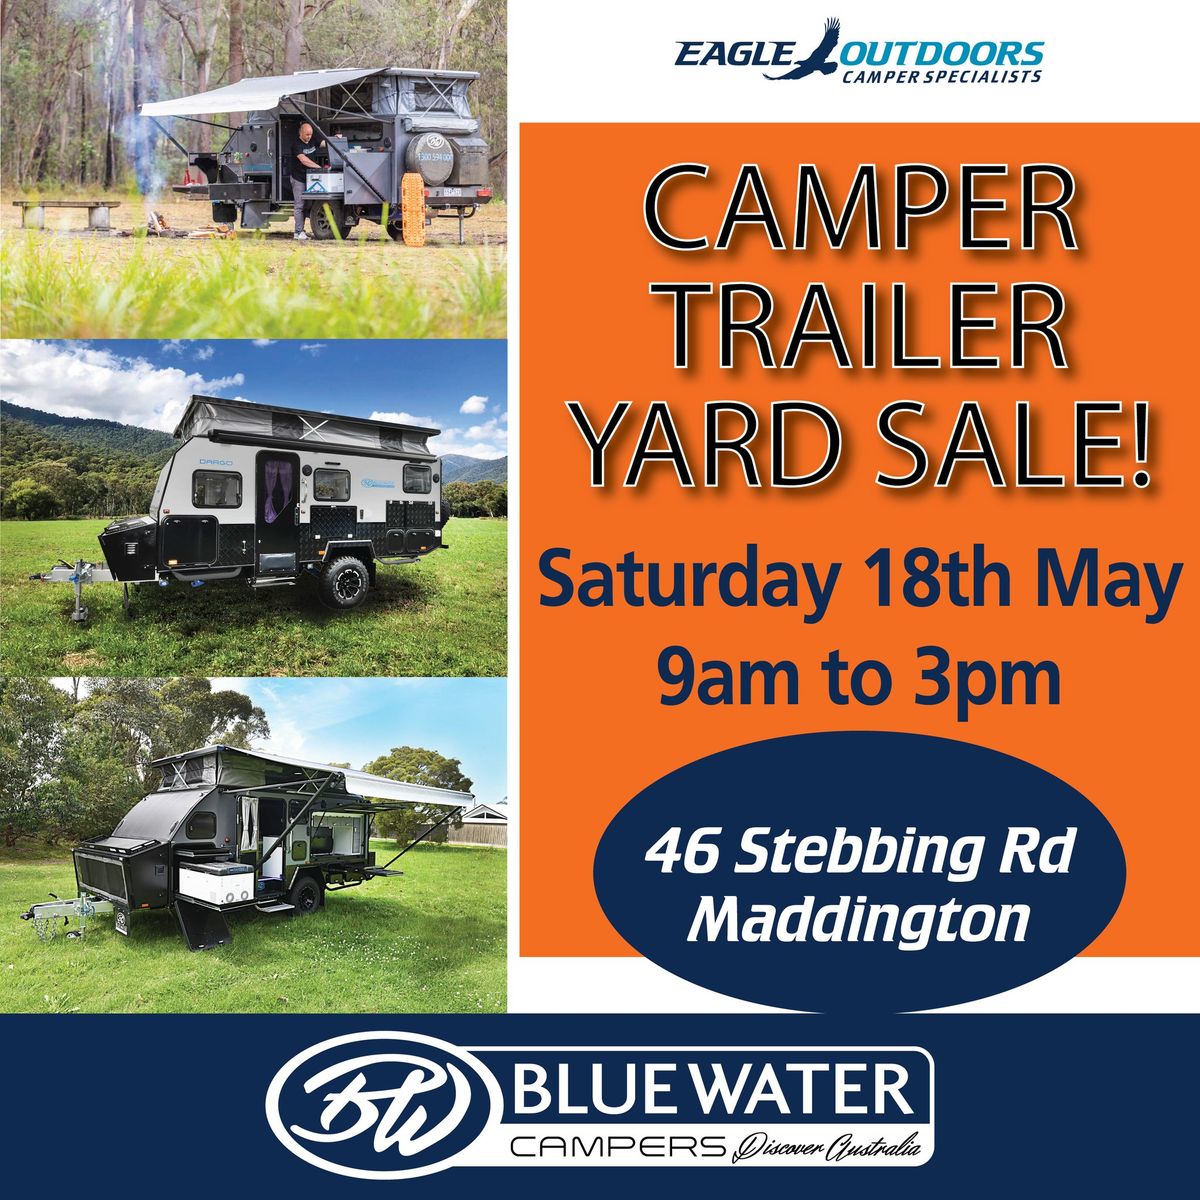 Bluewater Camper Trailers Yard Sale Perth Showroom Open Day